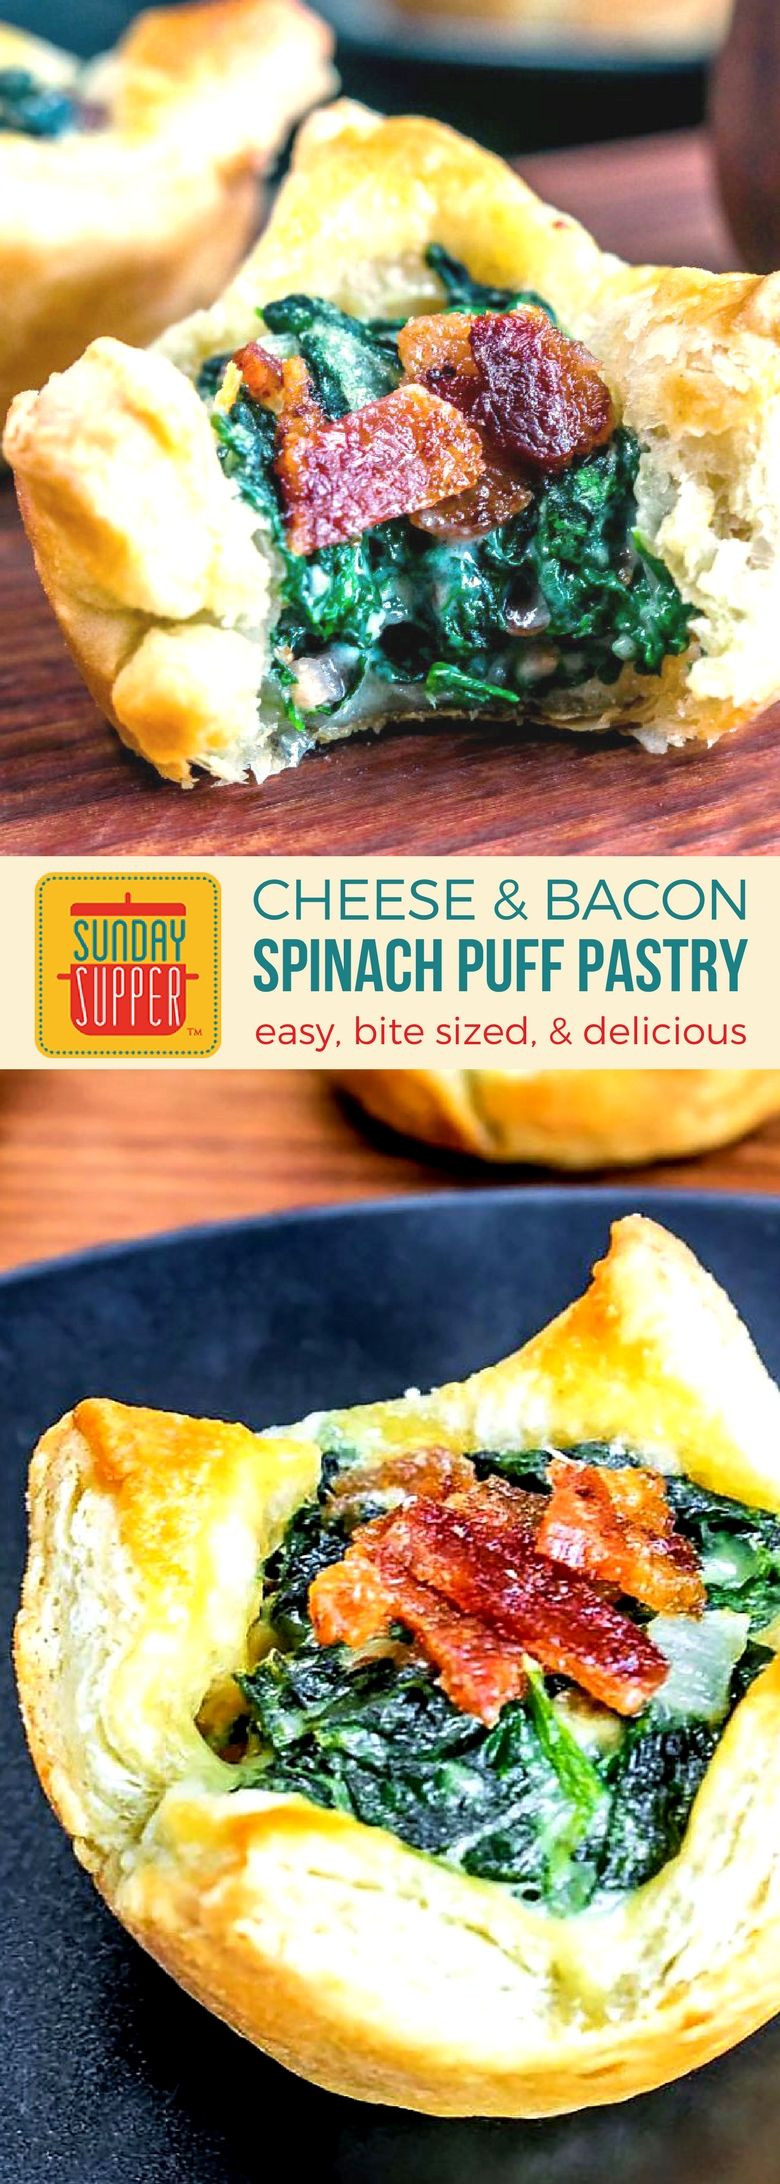 Puff Pastry Ideas Appetizers
 Simple buffet menu ideas like our bite sized Spinach Puff